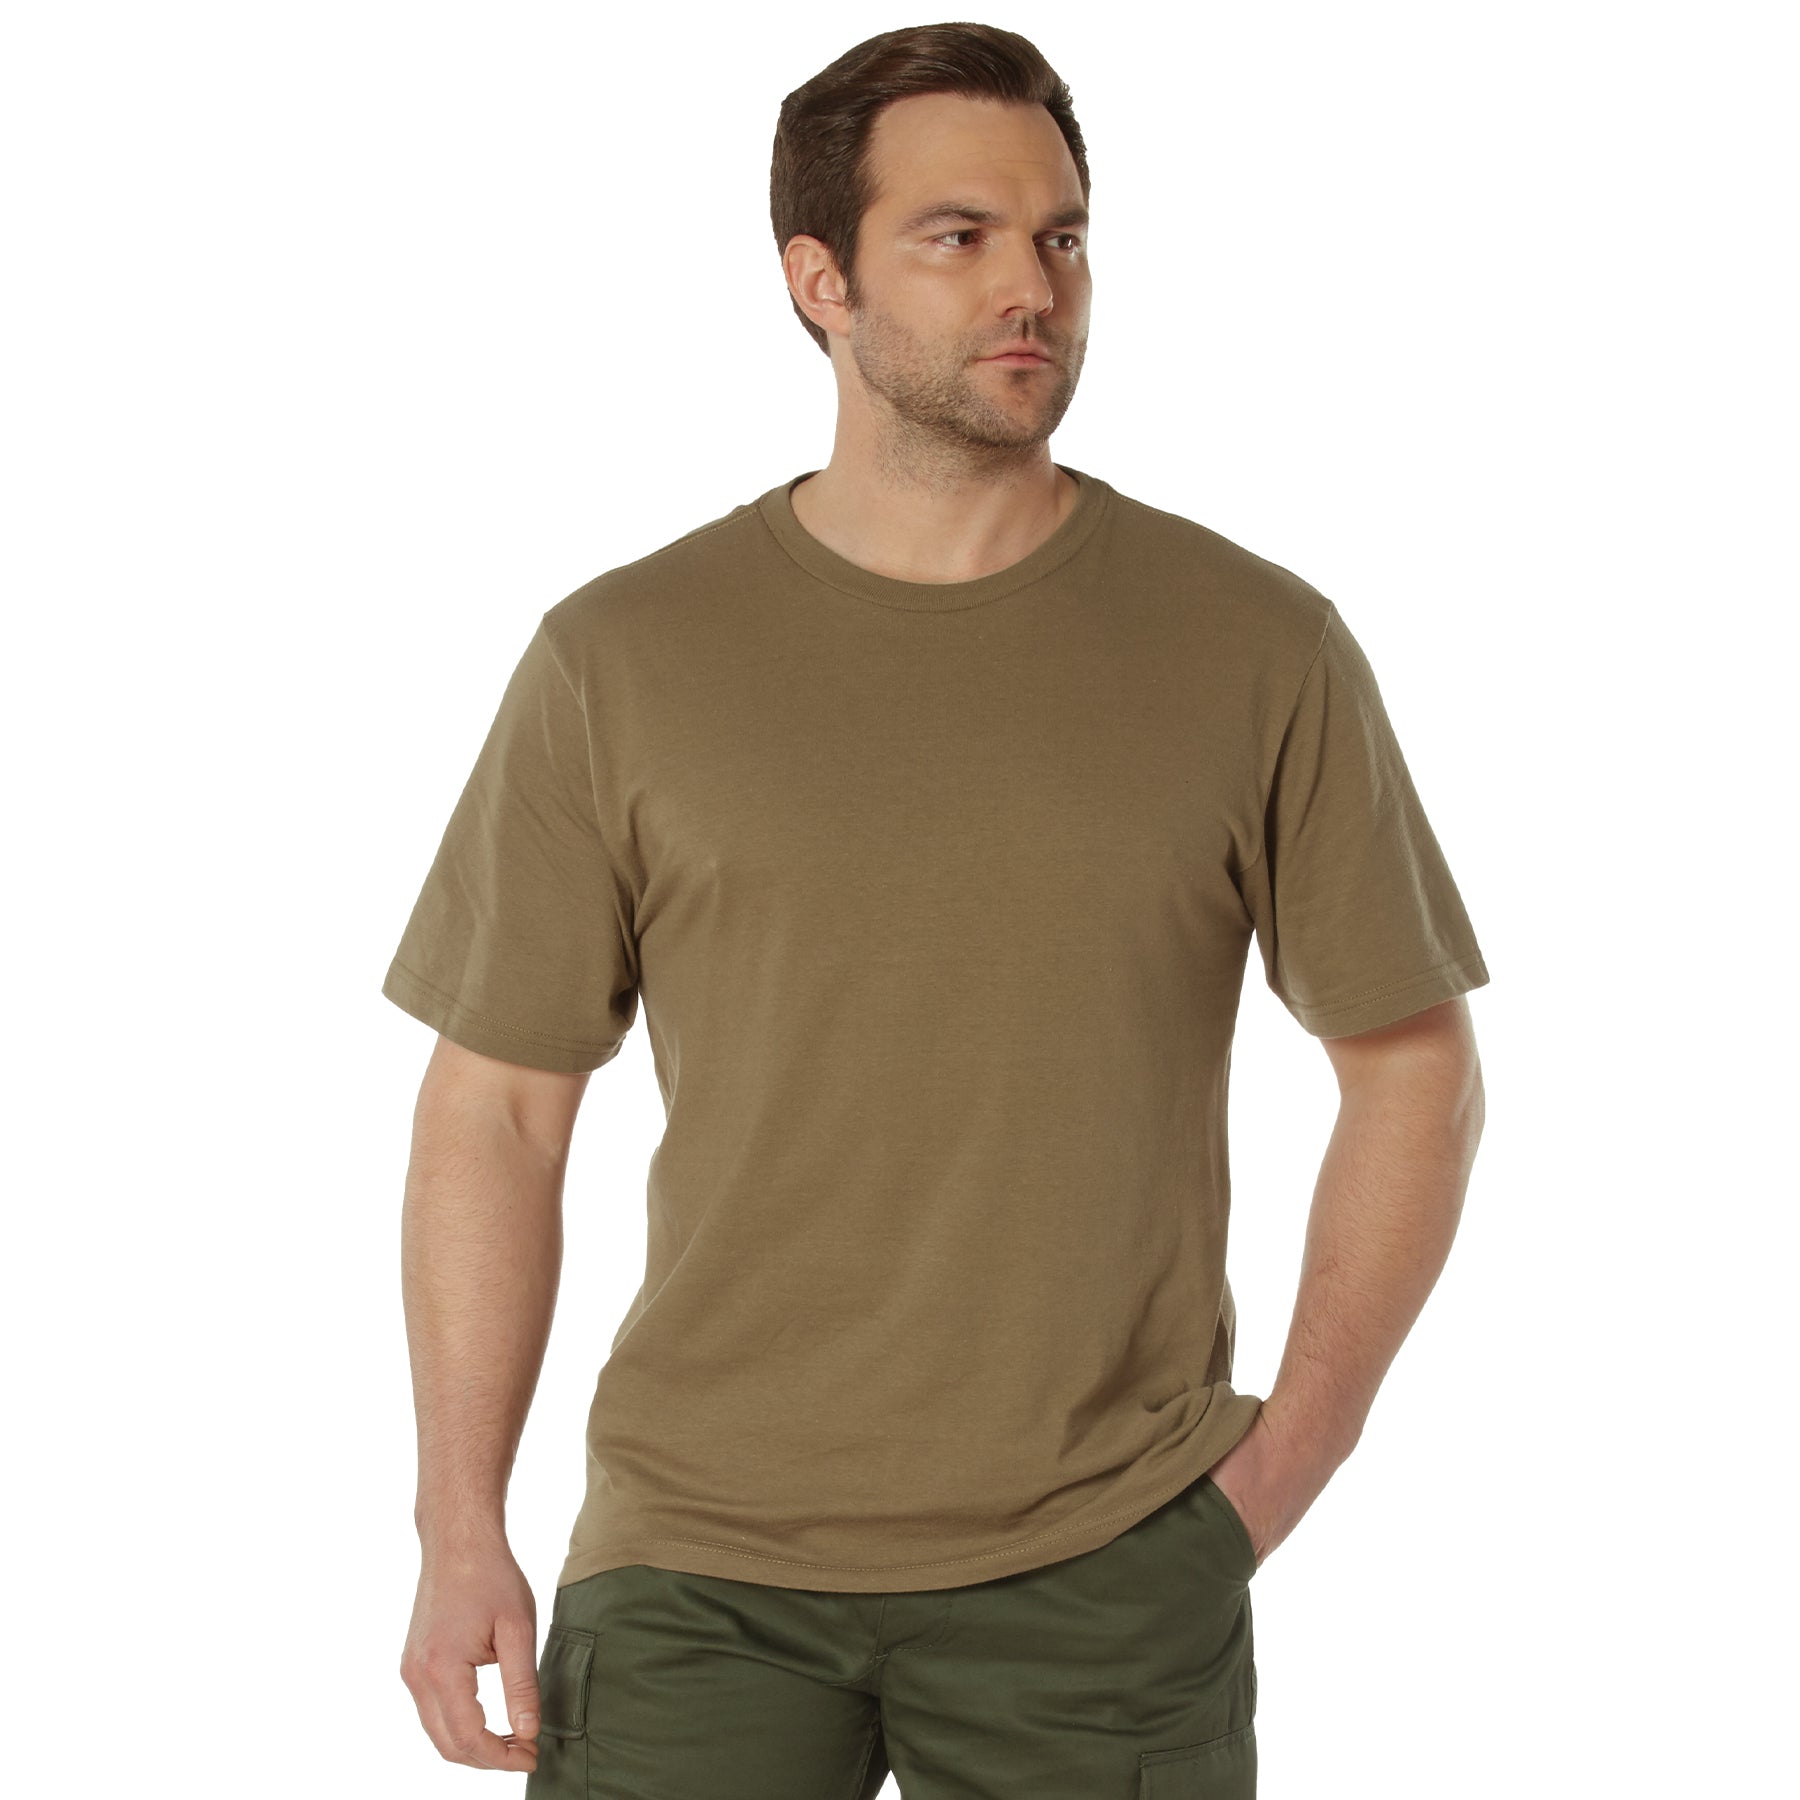 [AR 670-1] Poly/Cotton Comfort Fit T-Shirts Coyote Brown AR 670-1